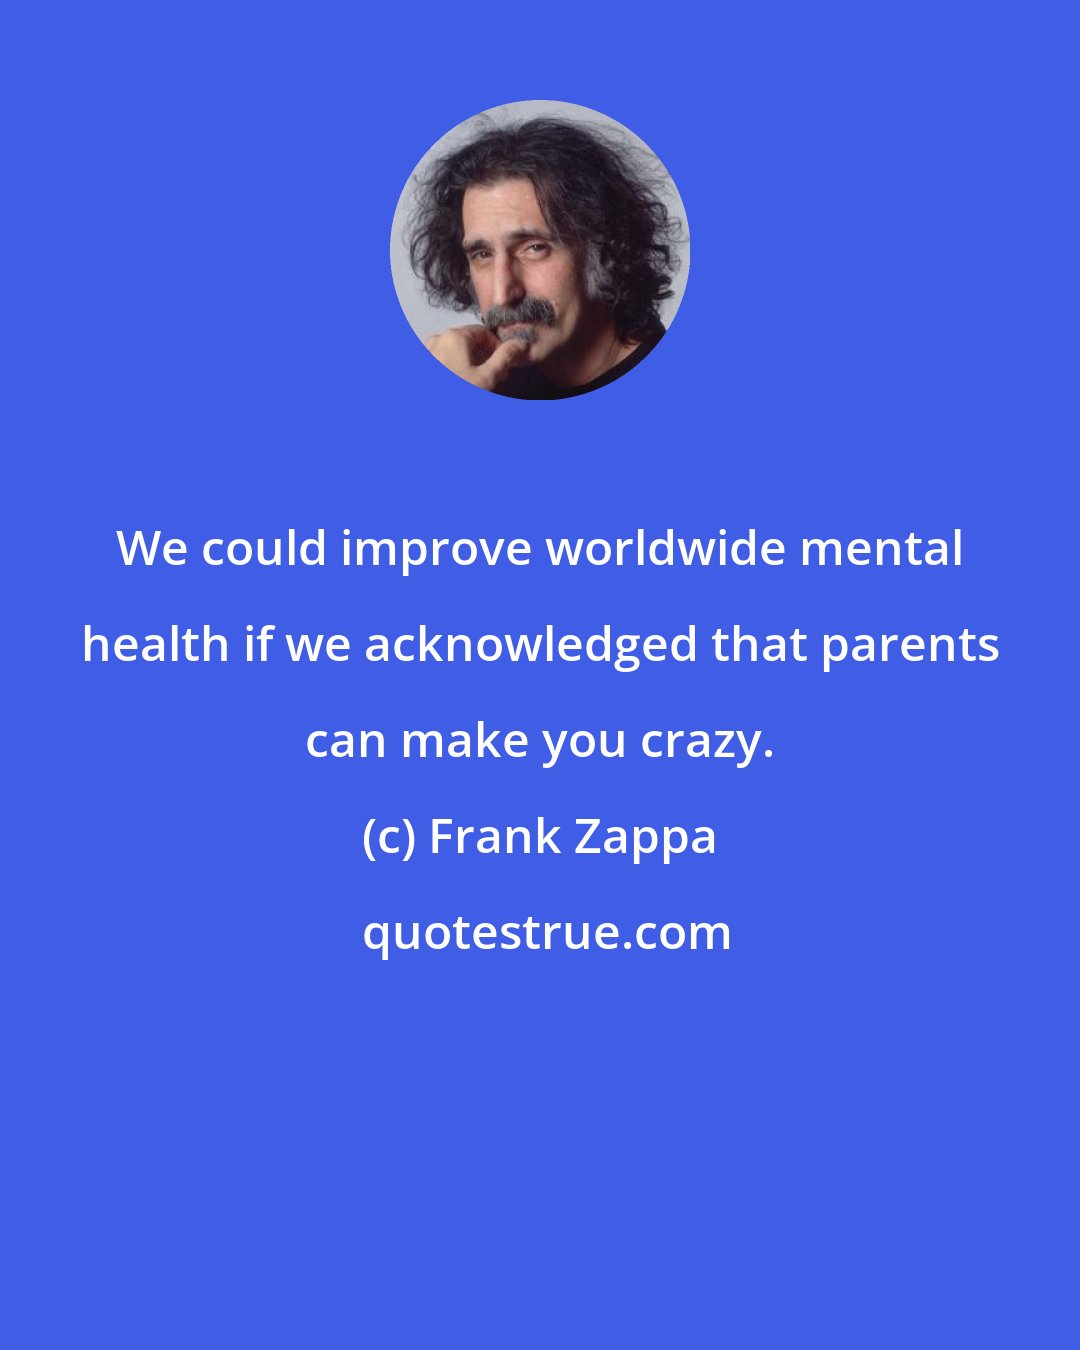 Frank Zappa: We could improve worldwide mental health if we acknowledged that parents can make you crazy.